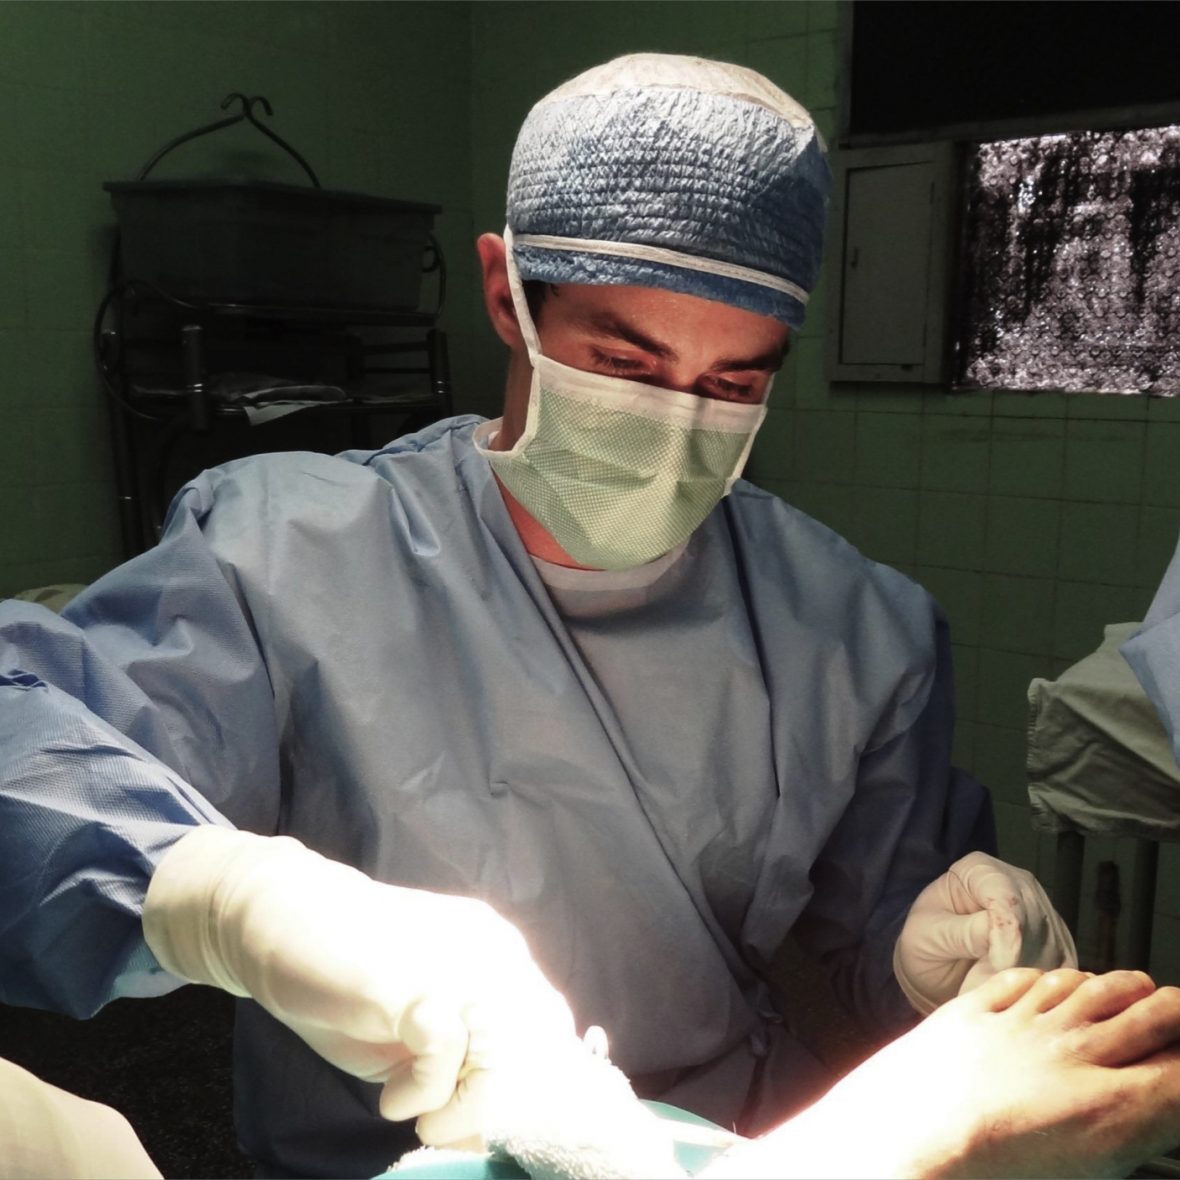 photo of Watson Fellow performing surgery, wearing light blue scrubs, headlamp attached, white gloves on arms